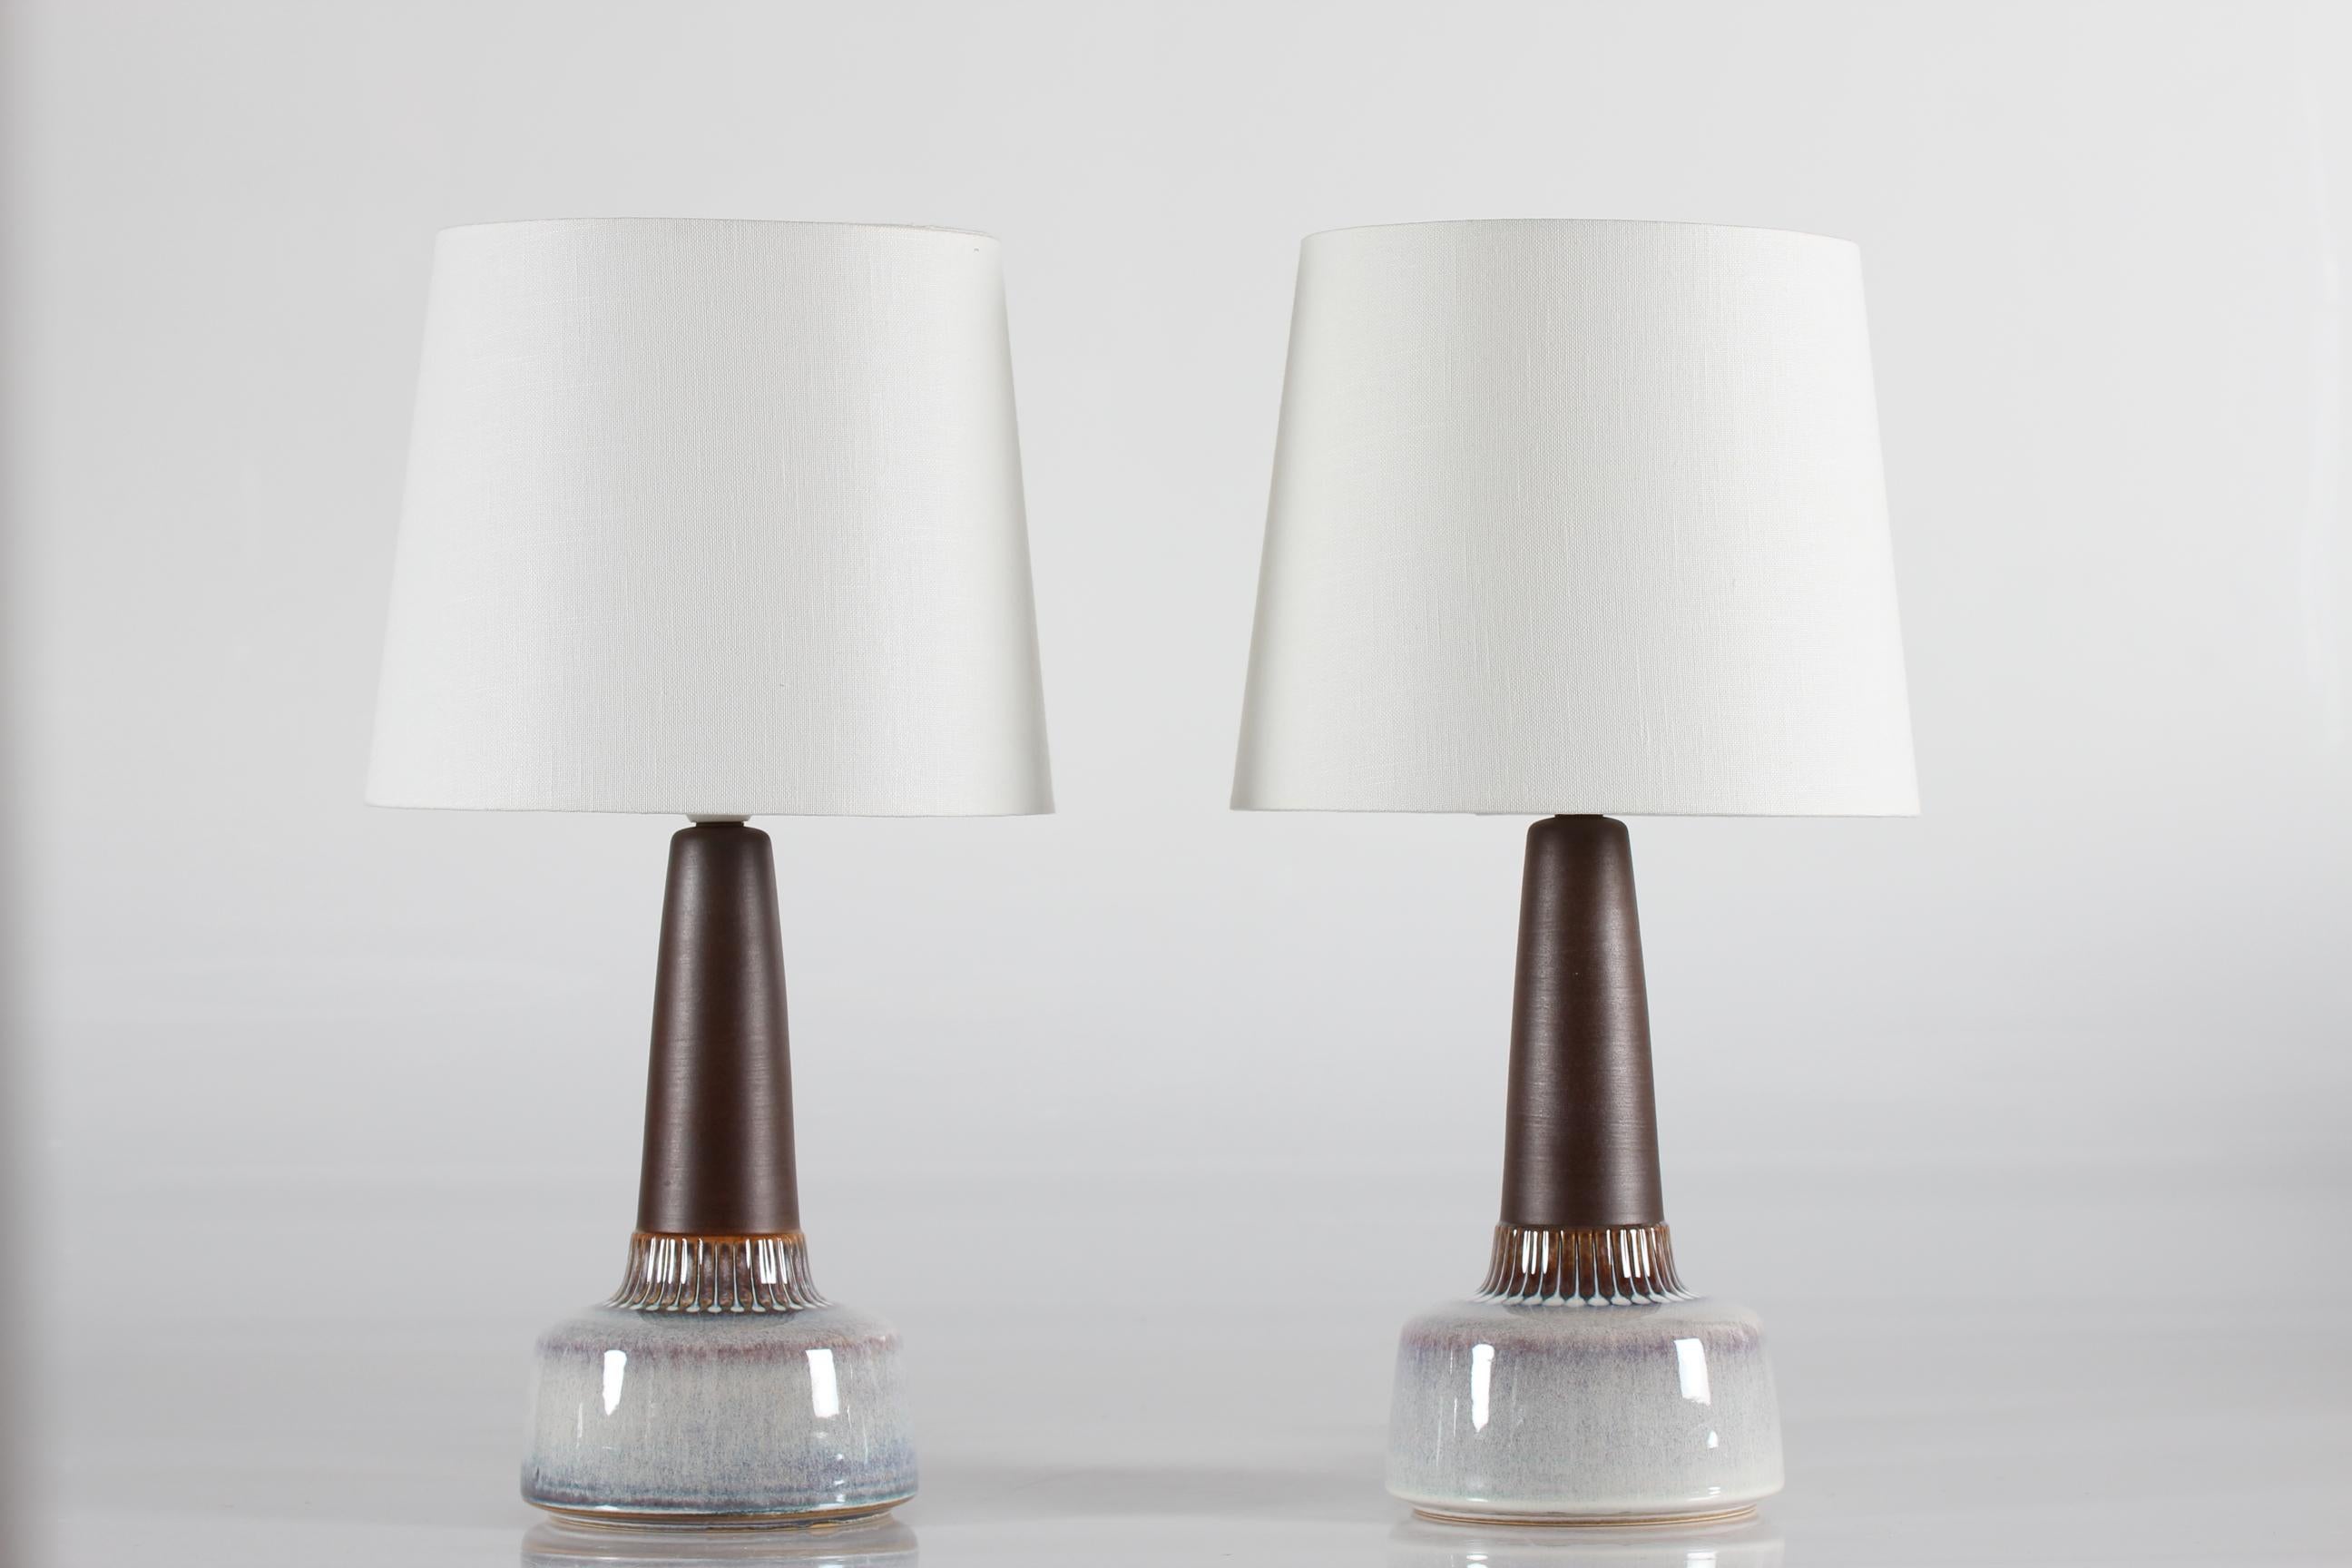 Pair of mid-century Danish table lamps by Danish ceramist Einar Johansen for Søholm. Made circa 1960's.

The lamp base has a matte brown neck contrasted by a shiny glaze in mother-of-pearl colors and circular dots around the lower part.

The